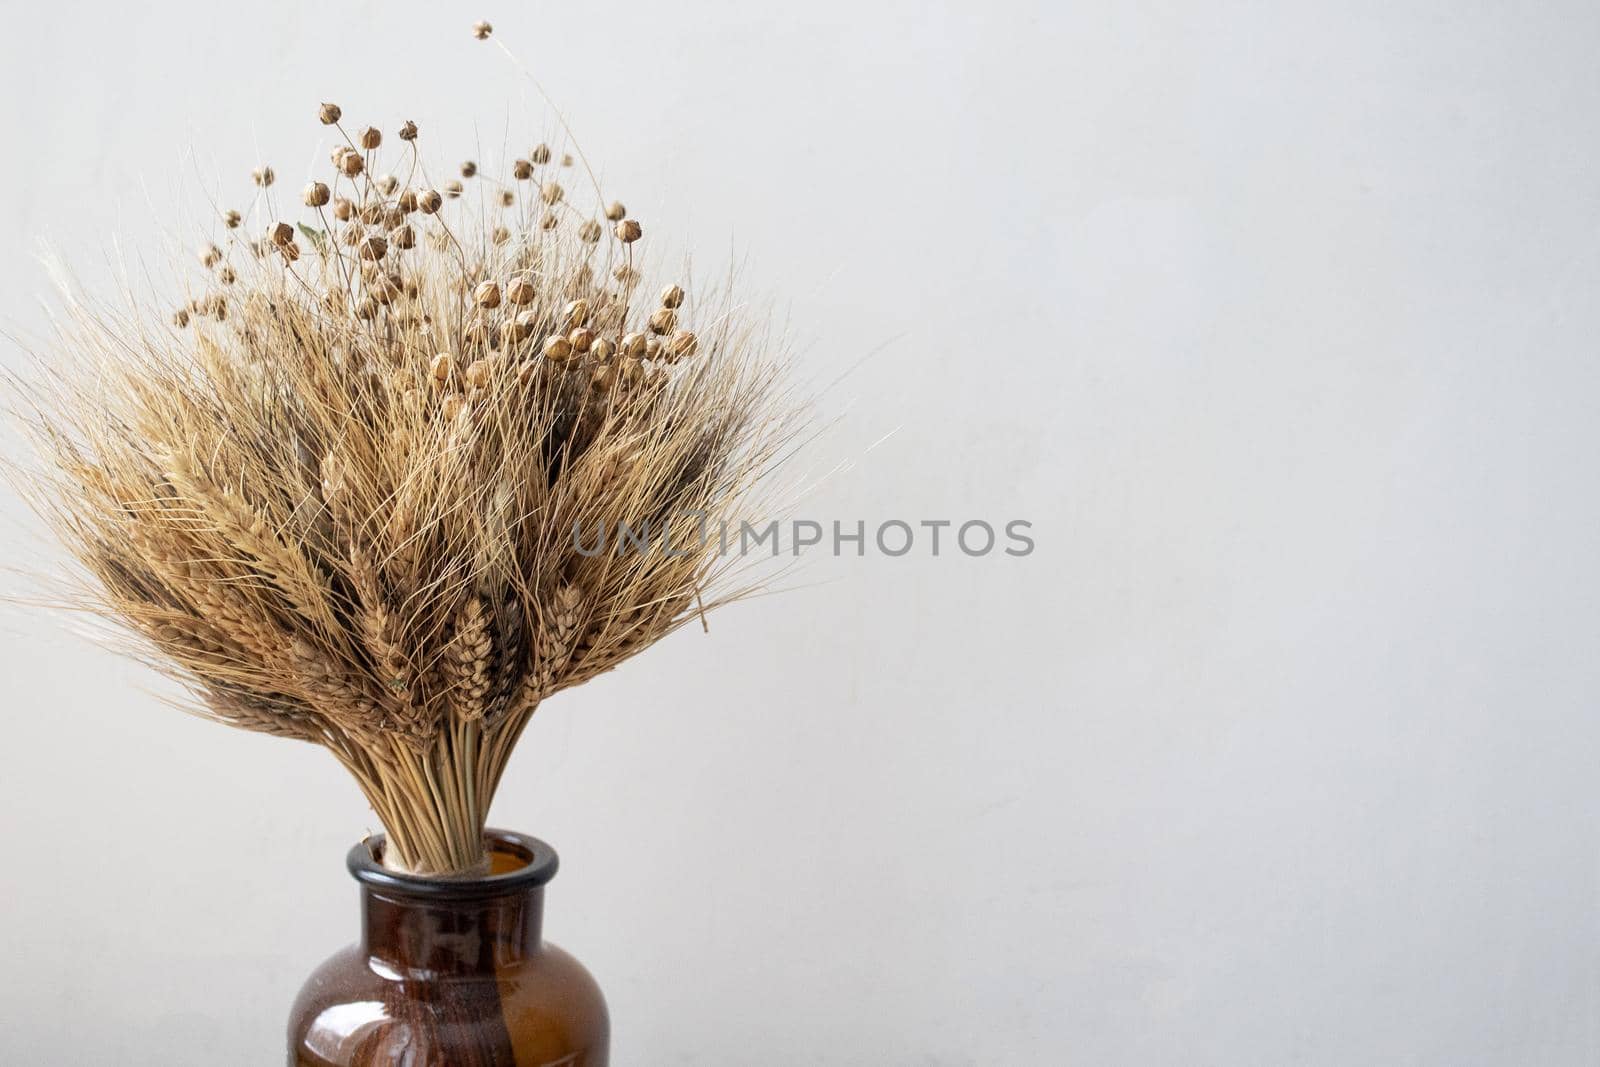 A simple brown vase with a bouquet of wheat. Minimalistic concept. Place for your text. White background. Home decor. Minimalism and simplicity.